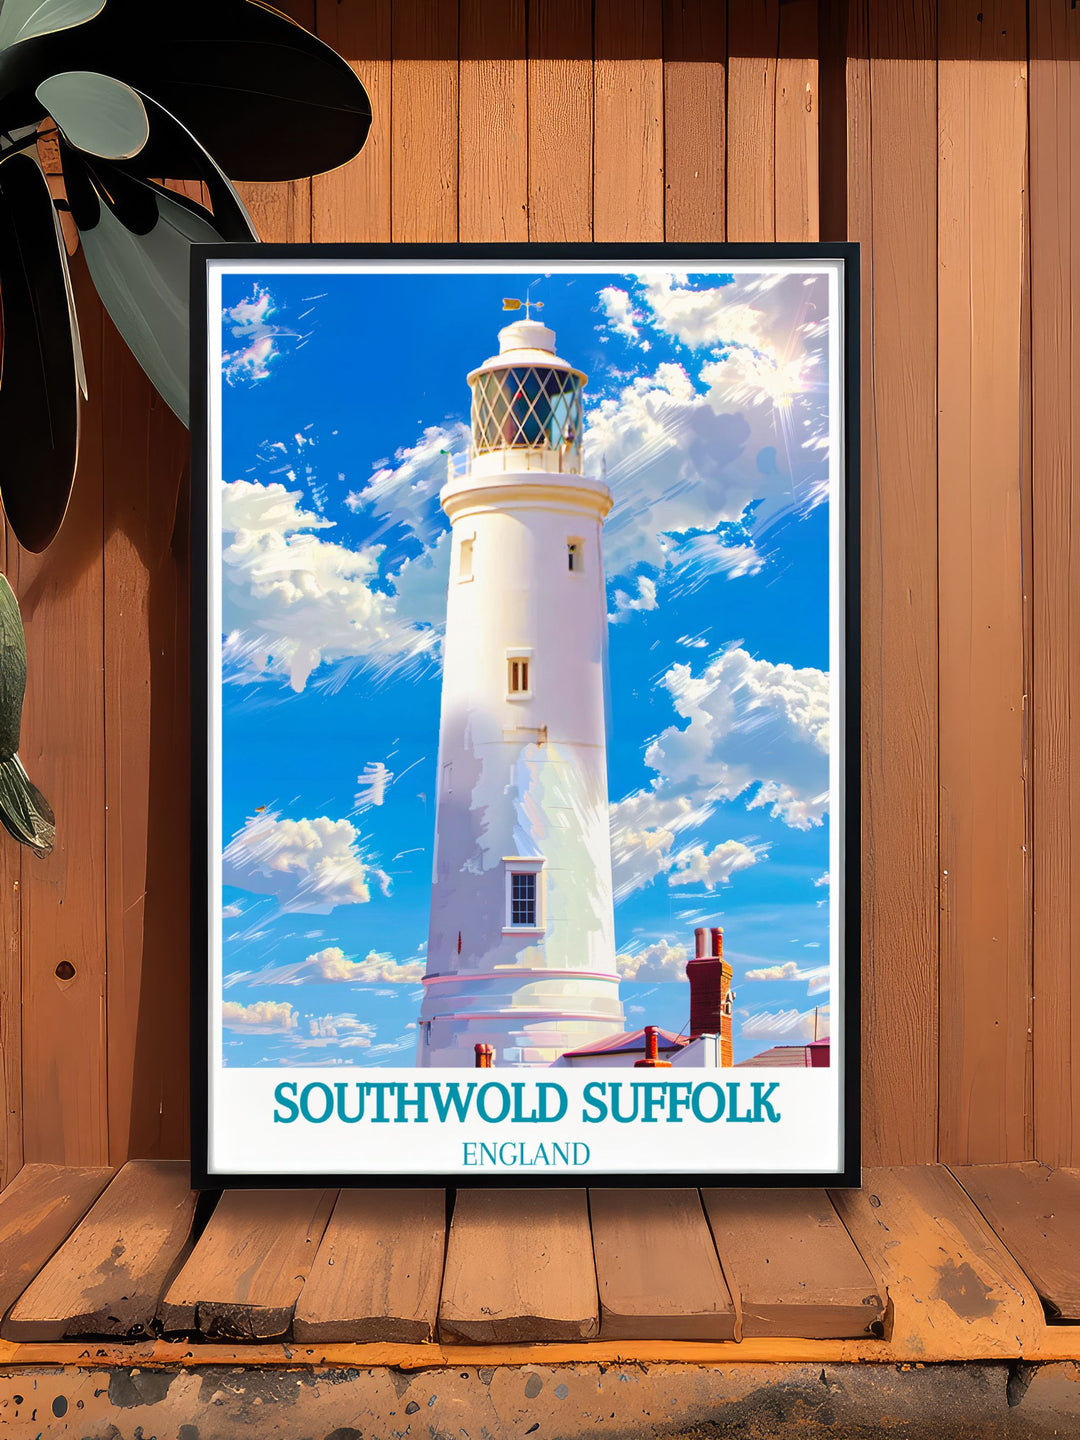 Embrace the historical significance and coastal beauty of Southwold with this travel poster, depicting the lighthouse and the quaint town.